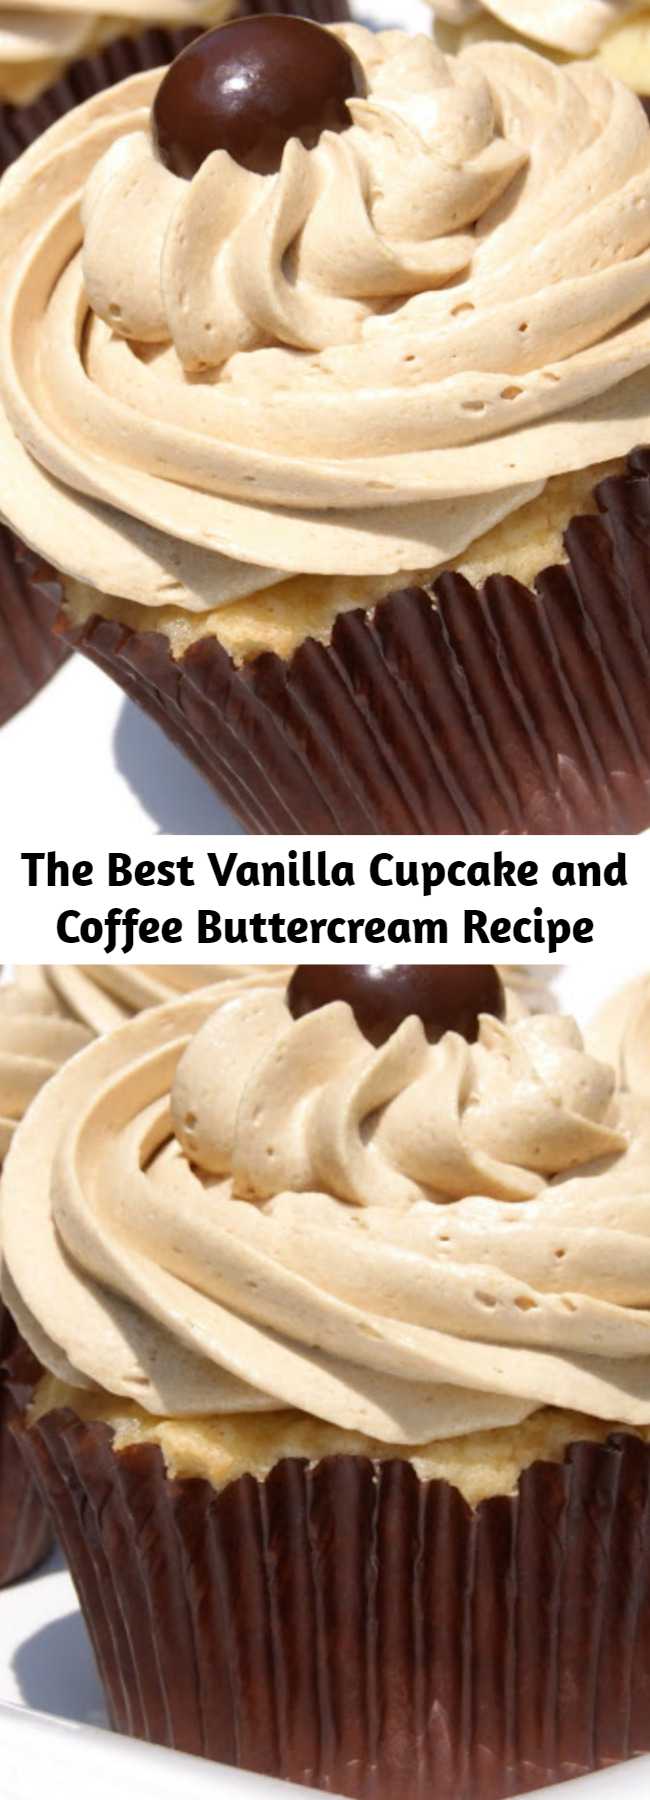 The Best Vanilla Cupcake and Coffee Buttercream Recipe - Fluffy & delicious ~ These are truly the BEST vanilla cupcakes with the BEST coffee buttercream frosting. A double sweet treat, for sure!